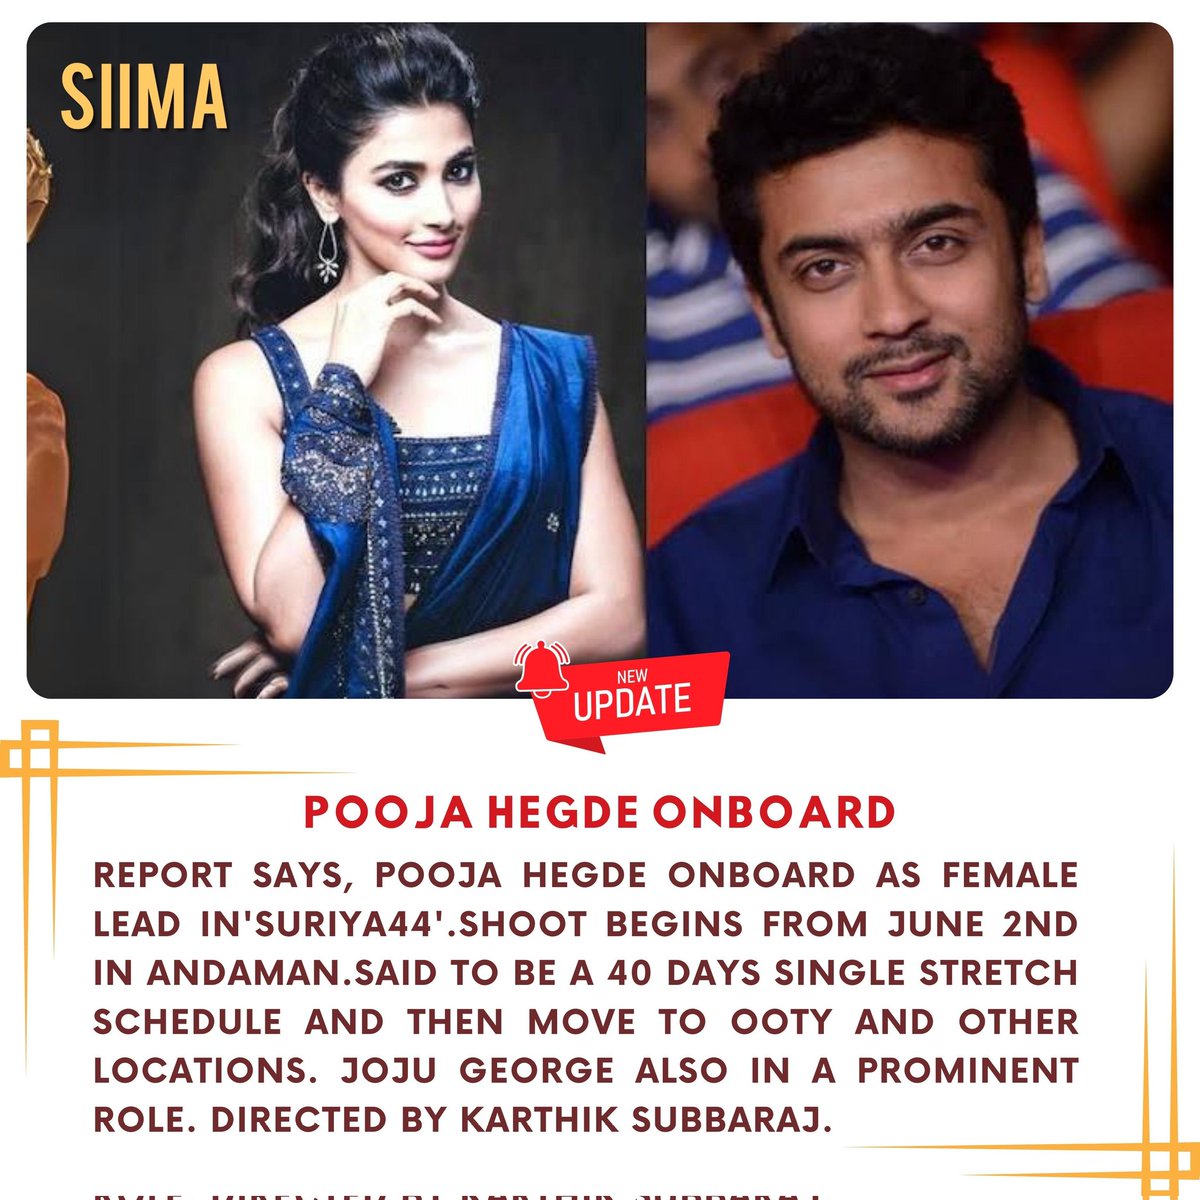 Exciting news alert! 🚨 Thrilled to join the cast of #Suriya44 as the female lead! 🌟 
Can't wait to dive into this new adventure. 🎬 Shooting starts June 2nd in the stunning Andaman! 🏝️ 
It's going to be an intense 40-day stretch before we move to Ooty and beyond. 🎥 Thrilled to